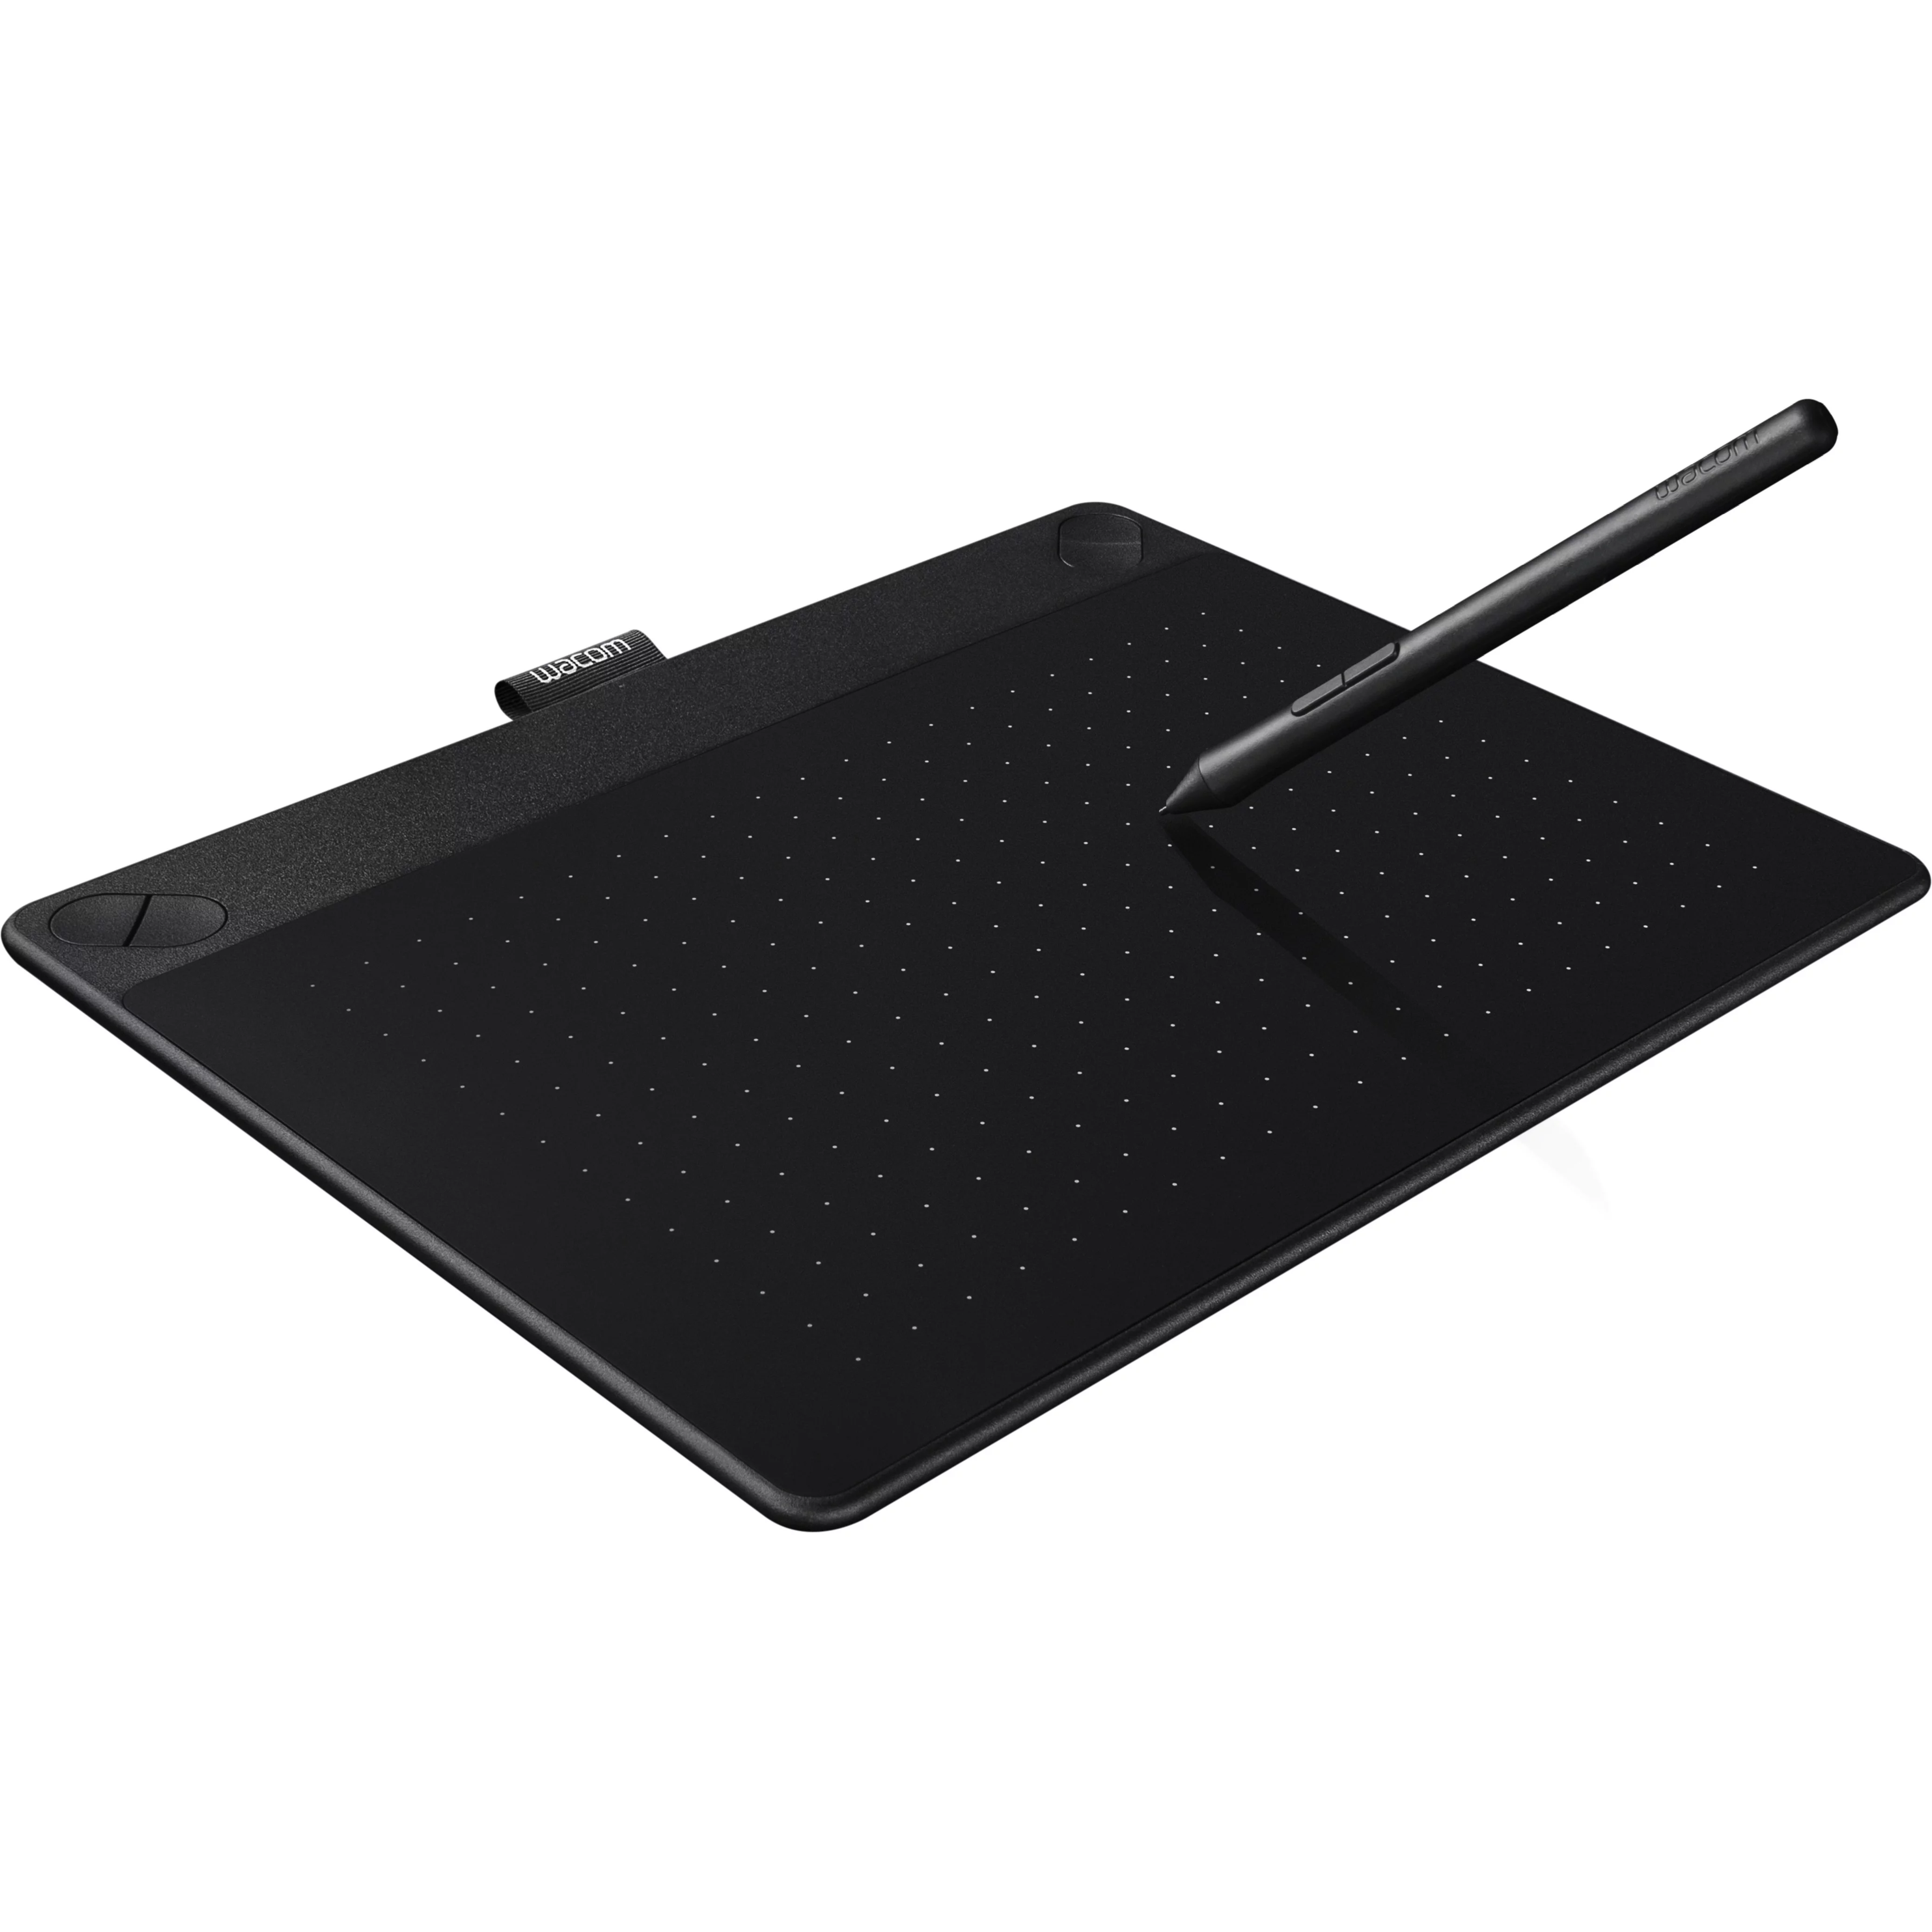 Intuos Draw Pen Small Blue (CTL-490DB-N)